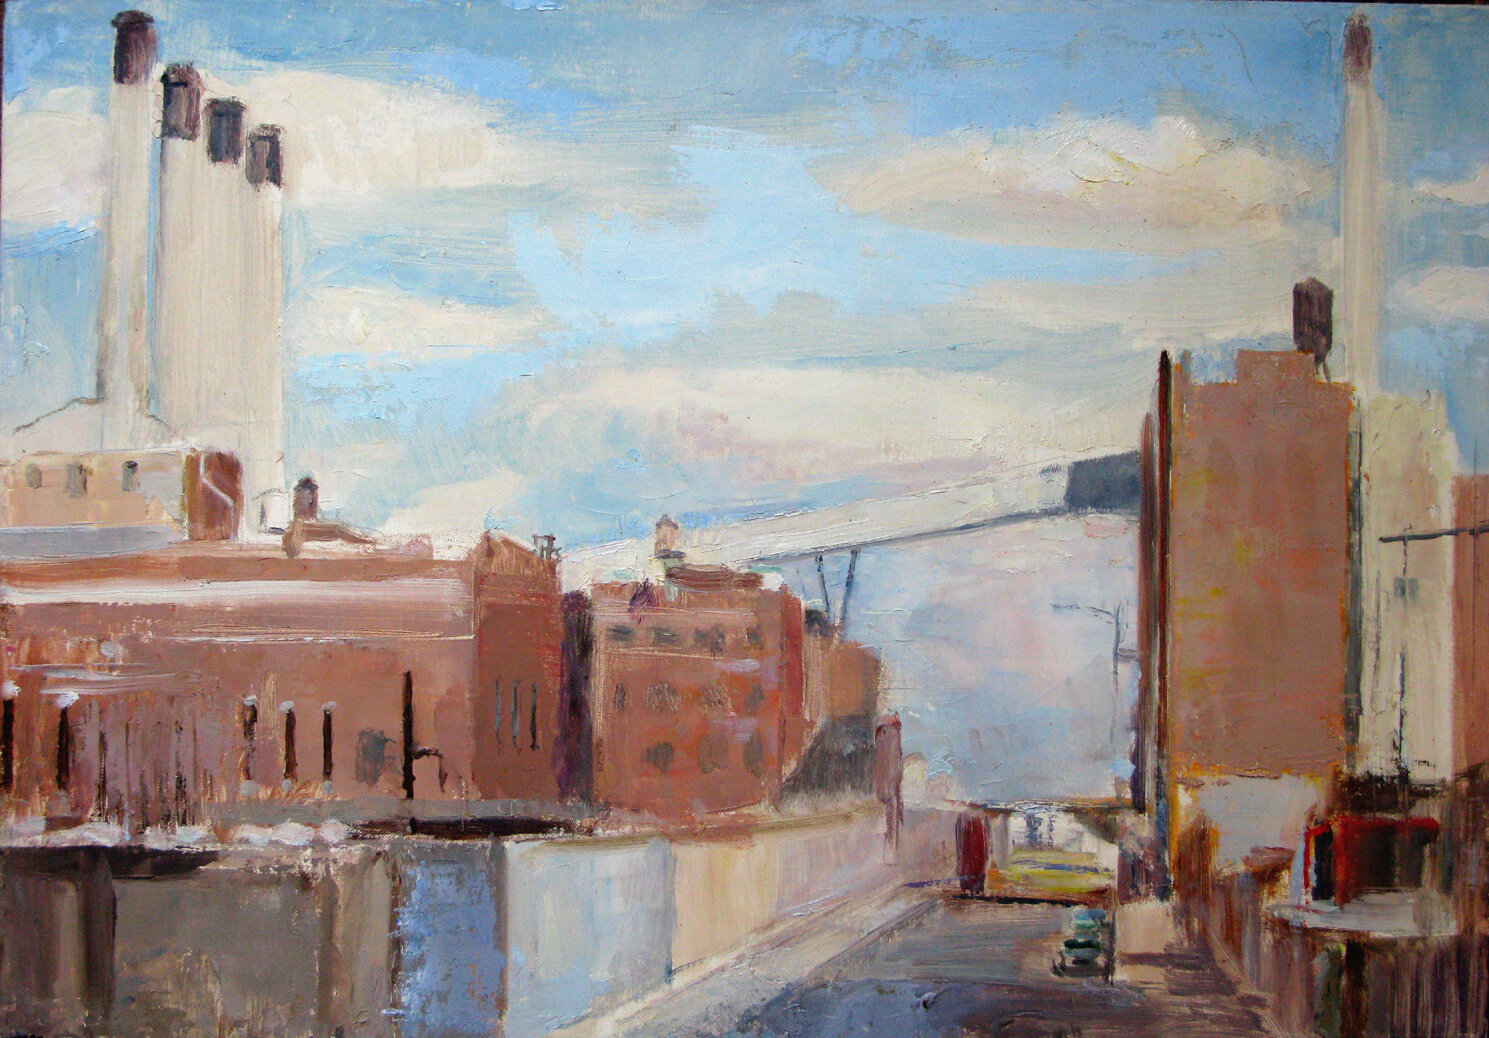 DUMBO Power Station, 14 x 20 inches, 1994. Collection of the artist.